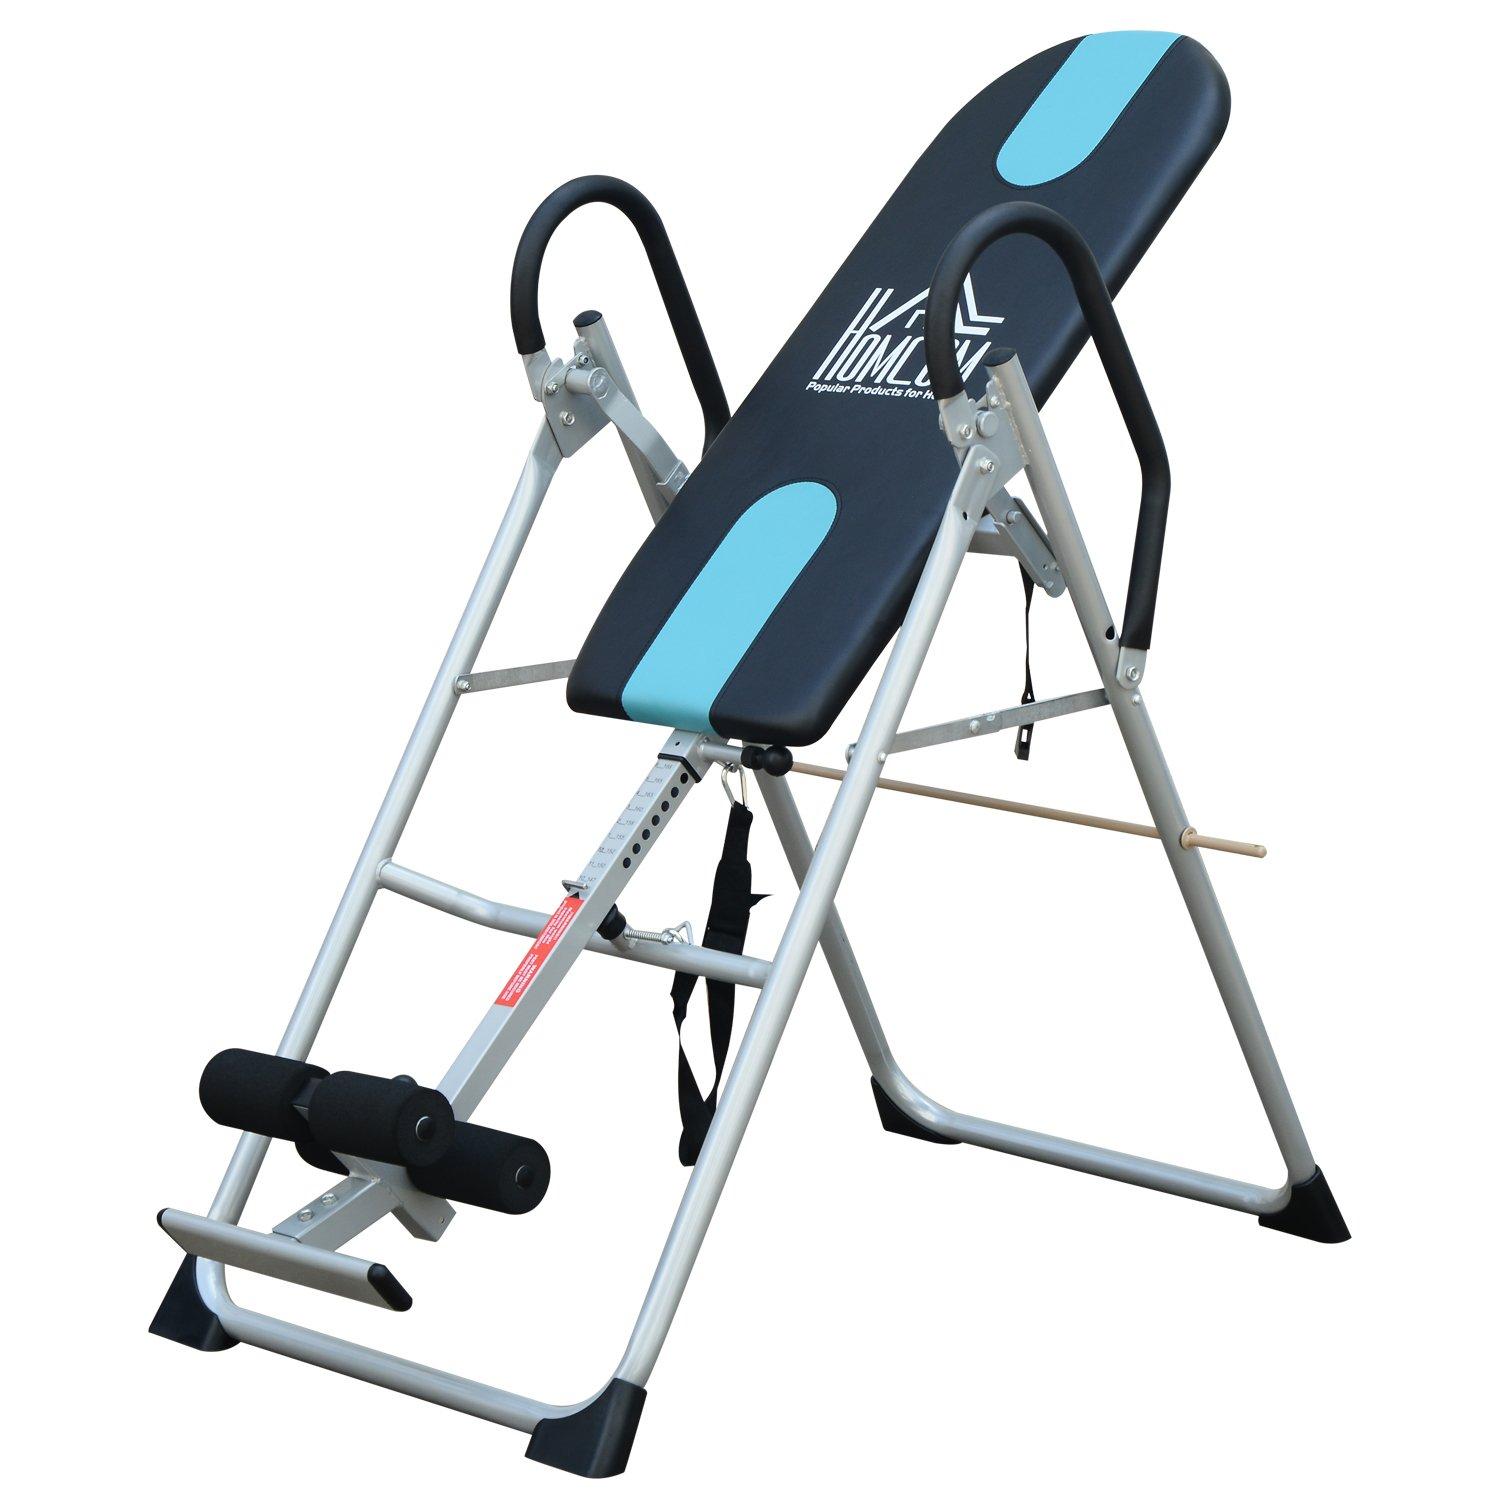 Foldable Therapy Gravity Inversion Table AB Exercise Bench Fitness